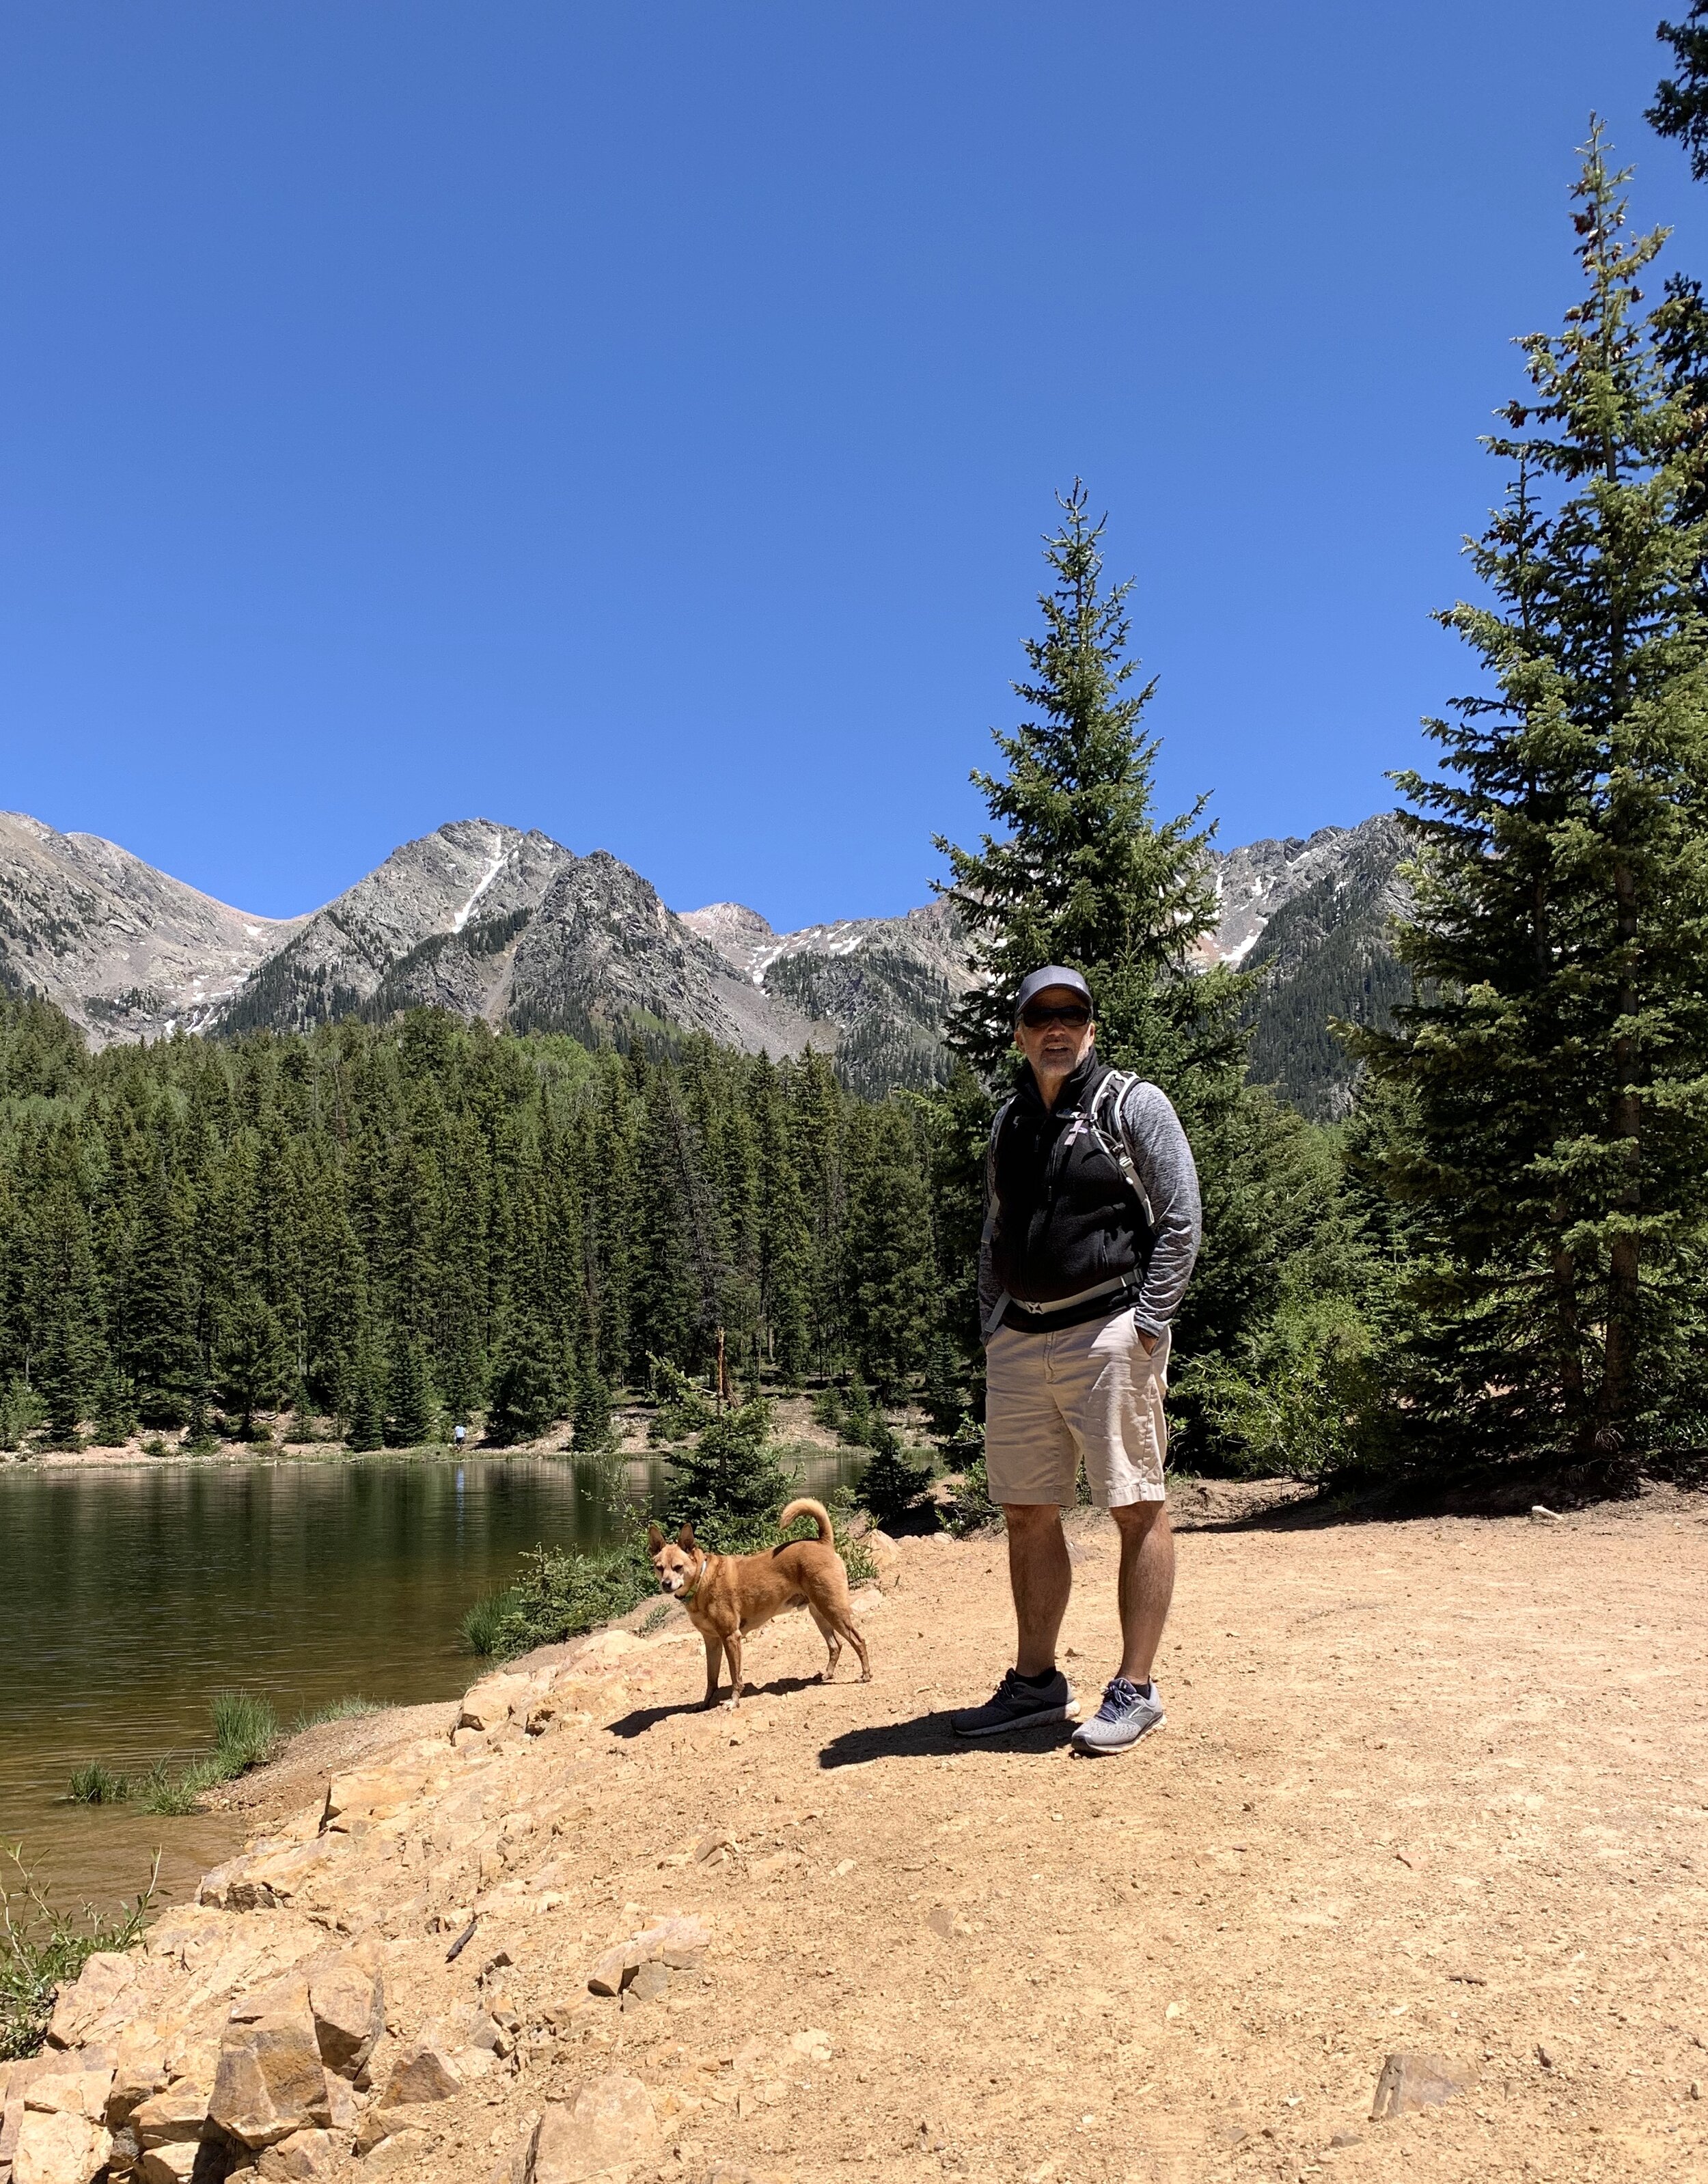  In Durango, Colorado we hiked more beautiful nature trails. This particular trail involved some 4-wheel-drive-off-roading to get to the trail head. The drive was intense but the 3-mile hike to this lake was lovely. 